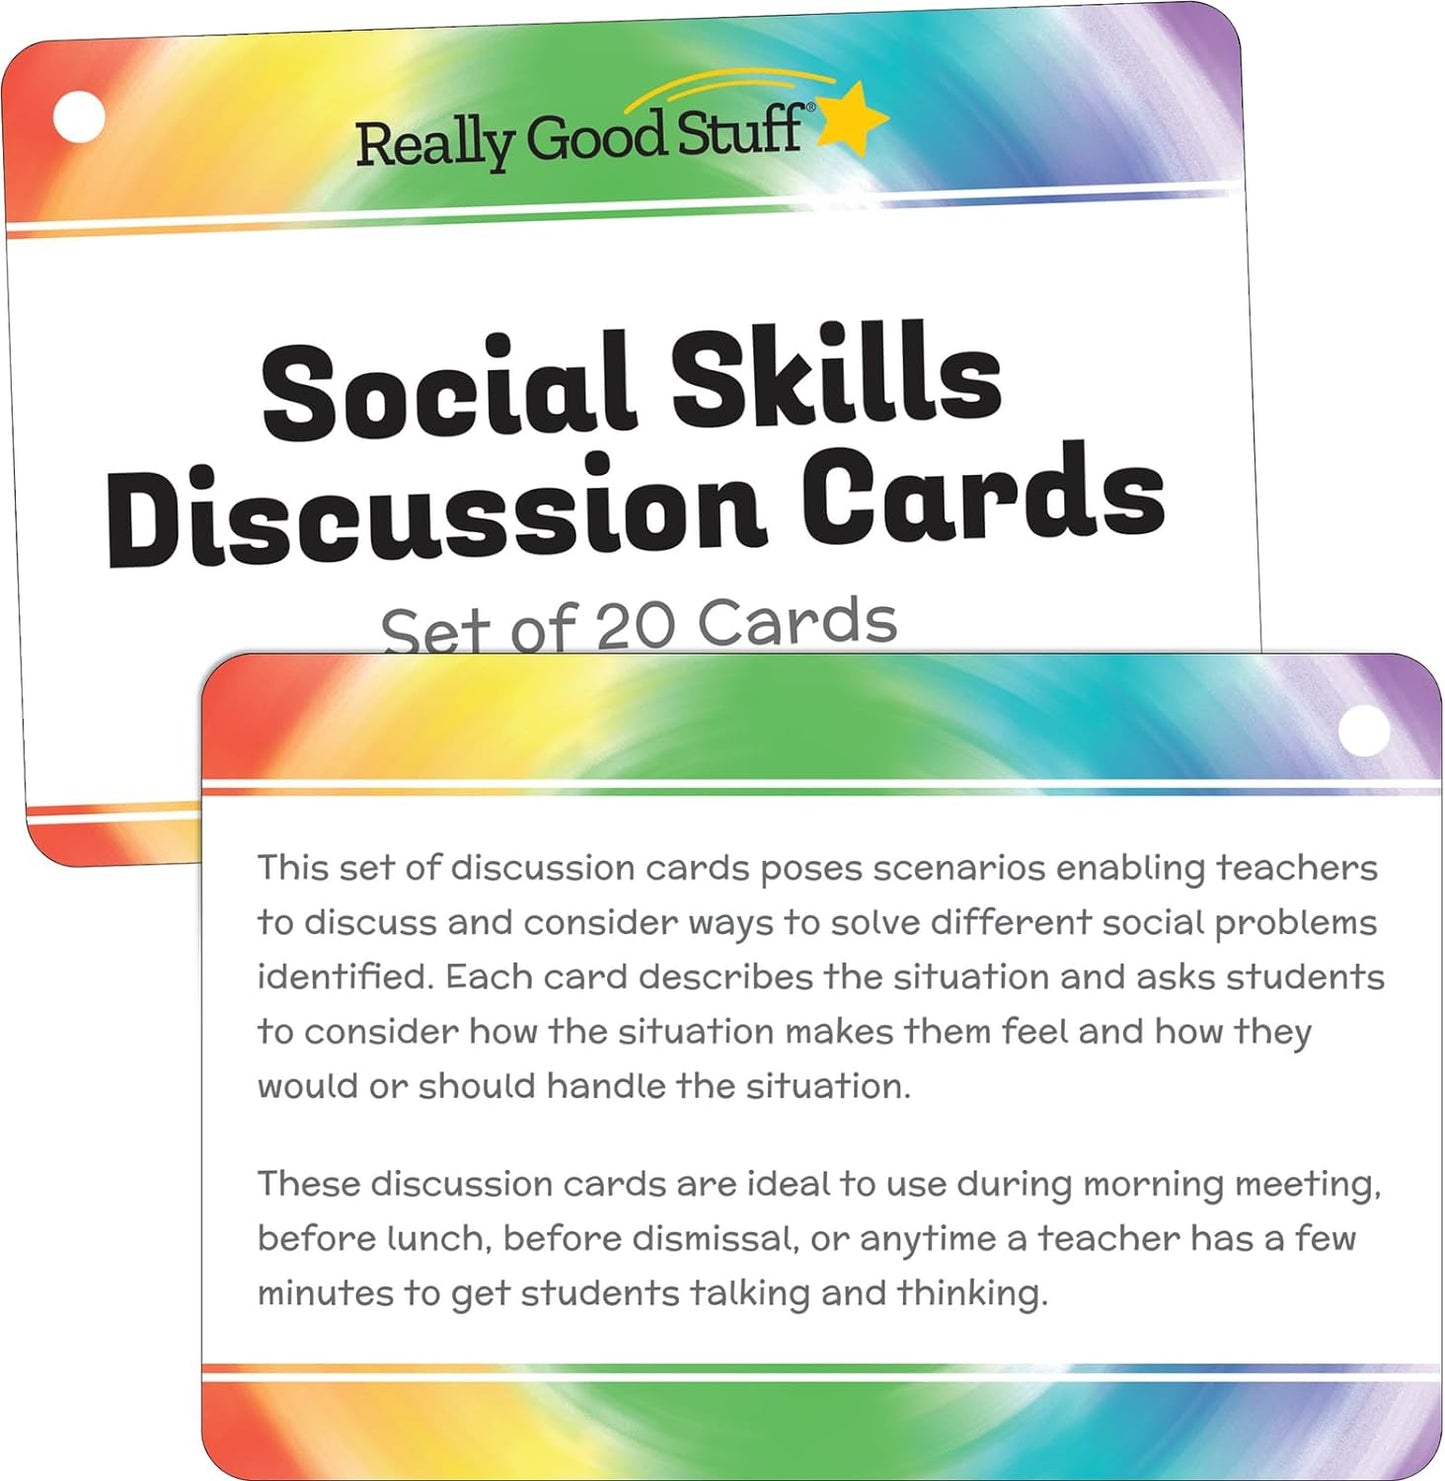 Social Skills Discussion Cards - Set of 20 Conversation Cards for Kids - Social Emotional Learning Activities for Understanding Social Rules and Developing Essential Social Skills